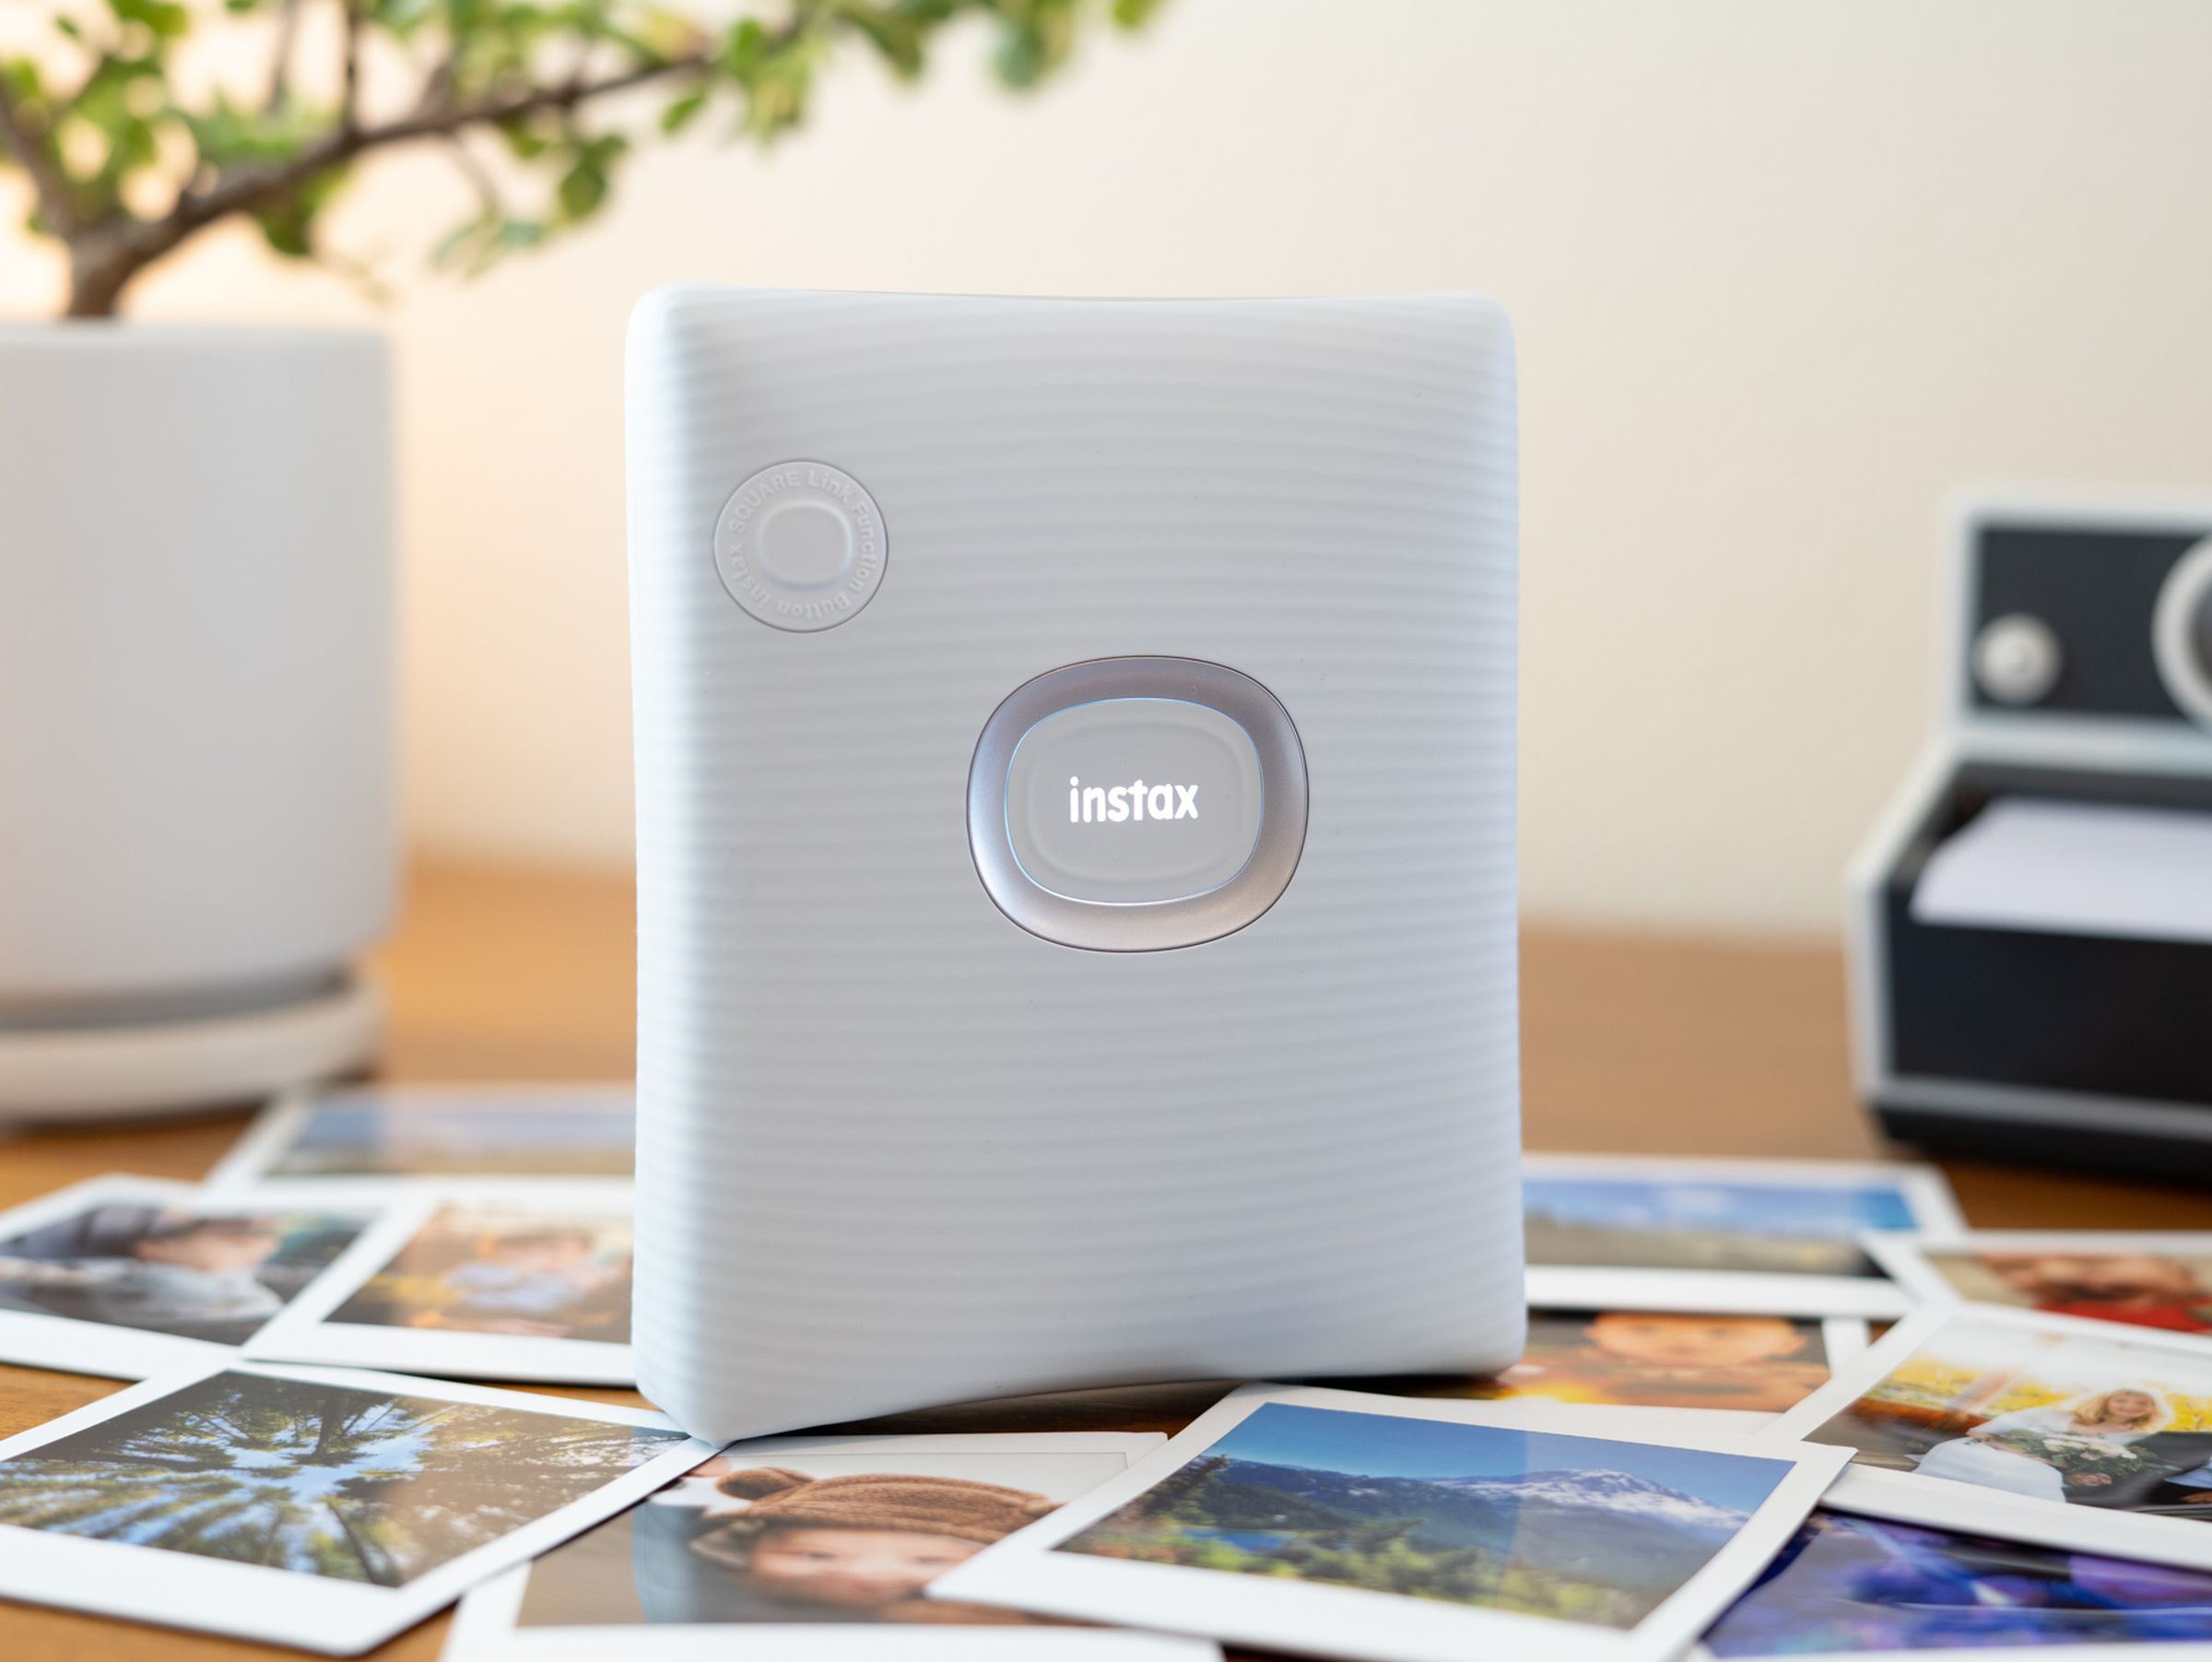 Instax Square Link standing upright with logo illuminated on a desk with square prints.